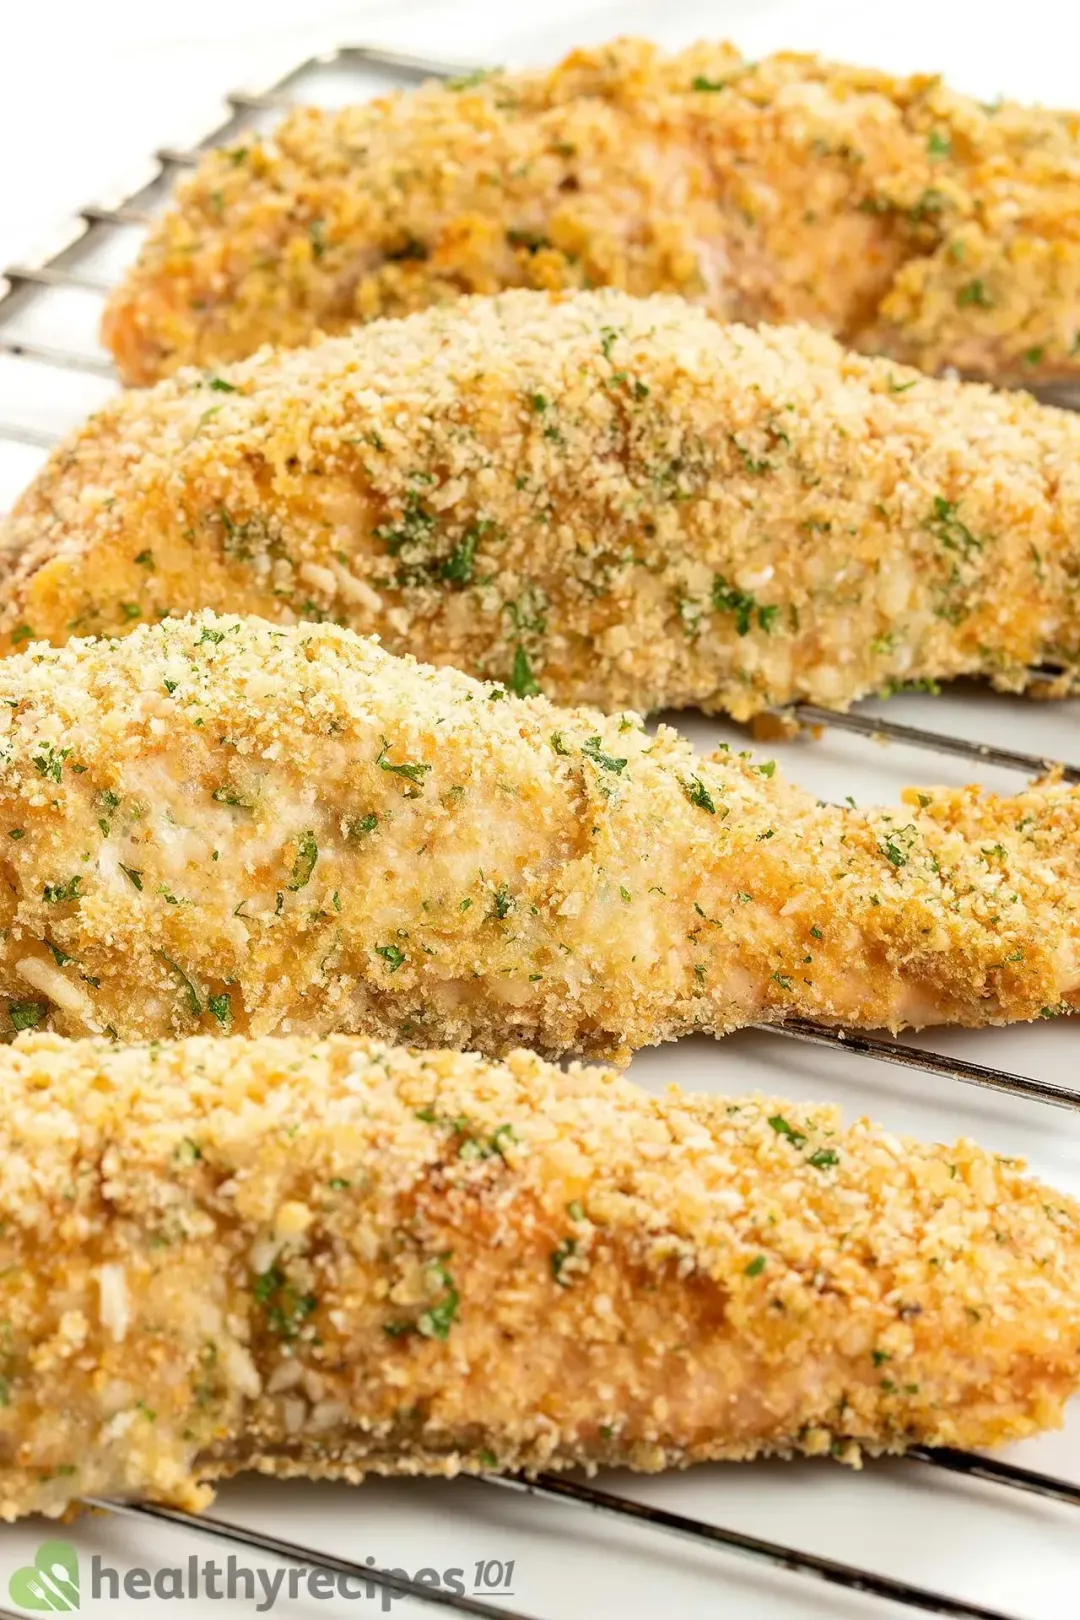 Four pieces of salmon fillets crusted in parmesan and breadcrumbs laid on a cooking rack